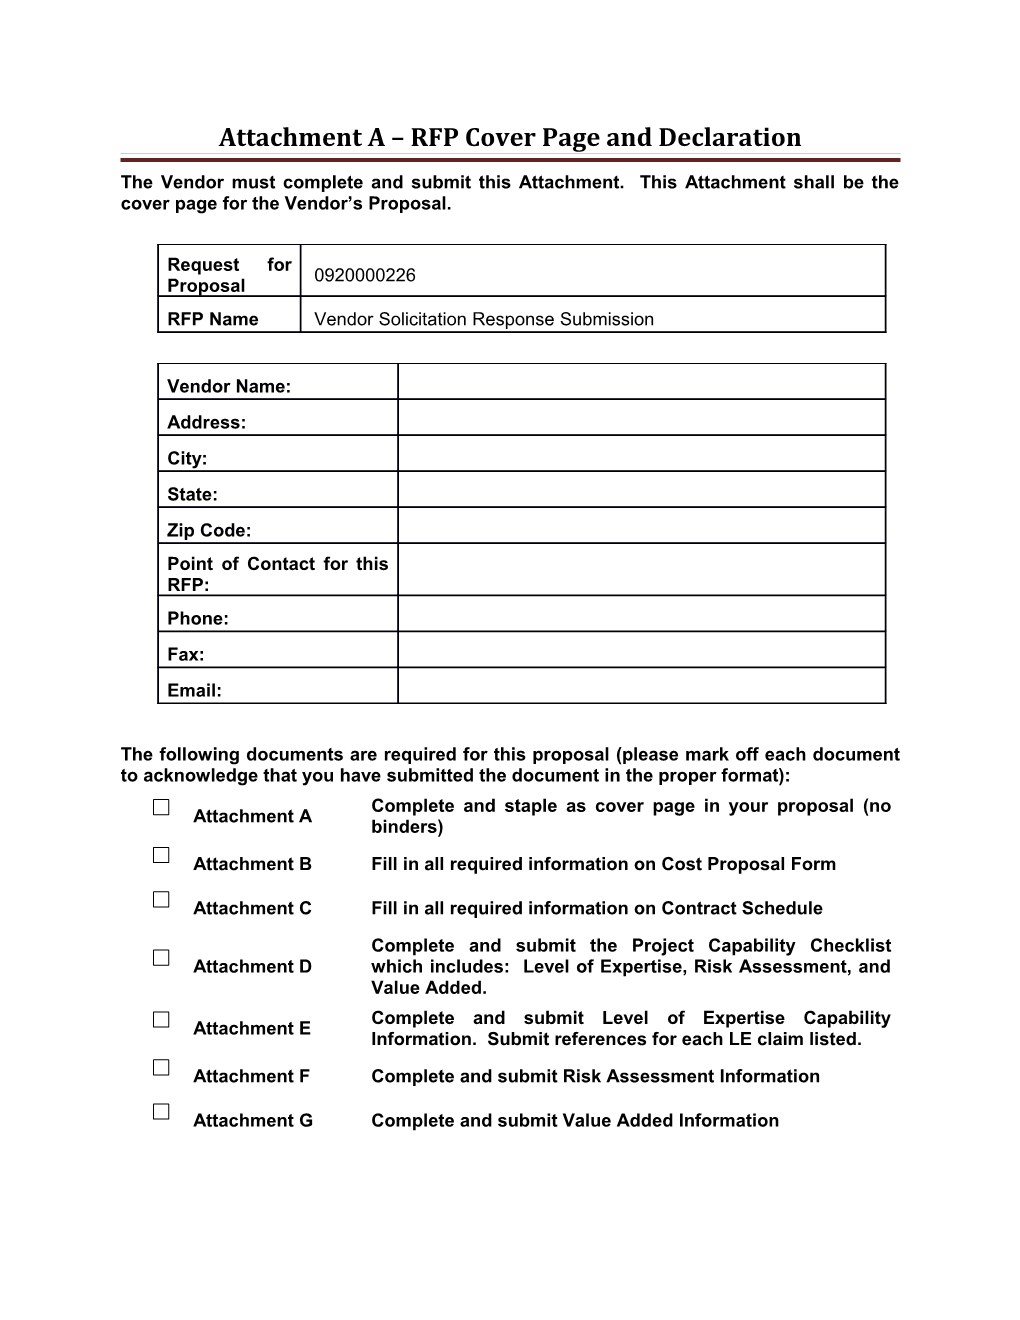 Attachment a RFP Cover Page and Declaration